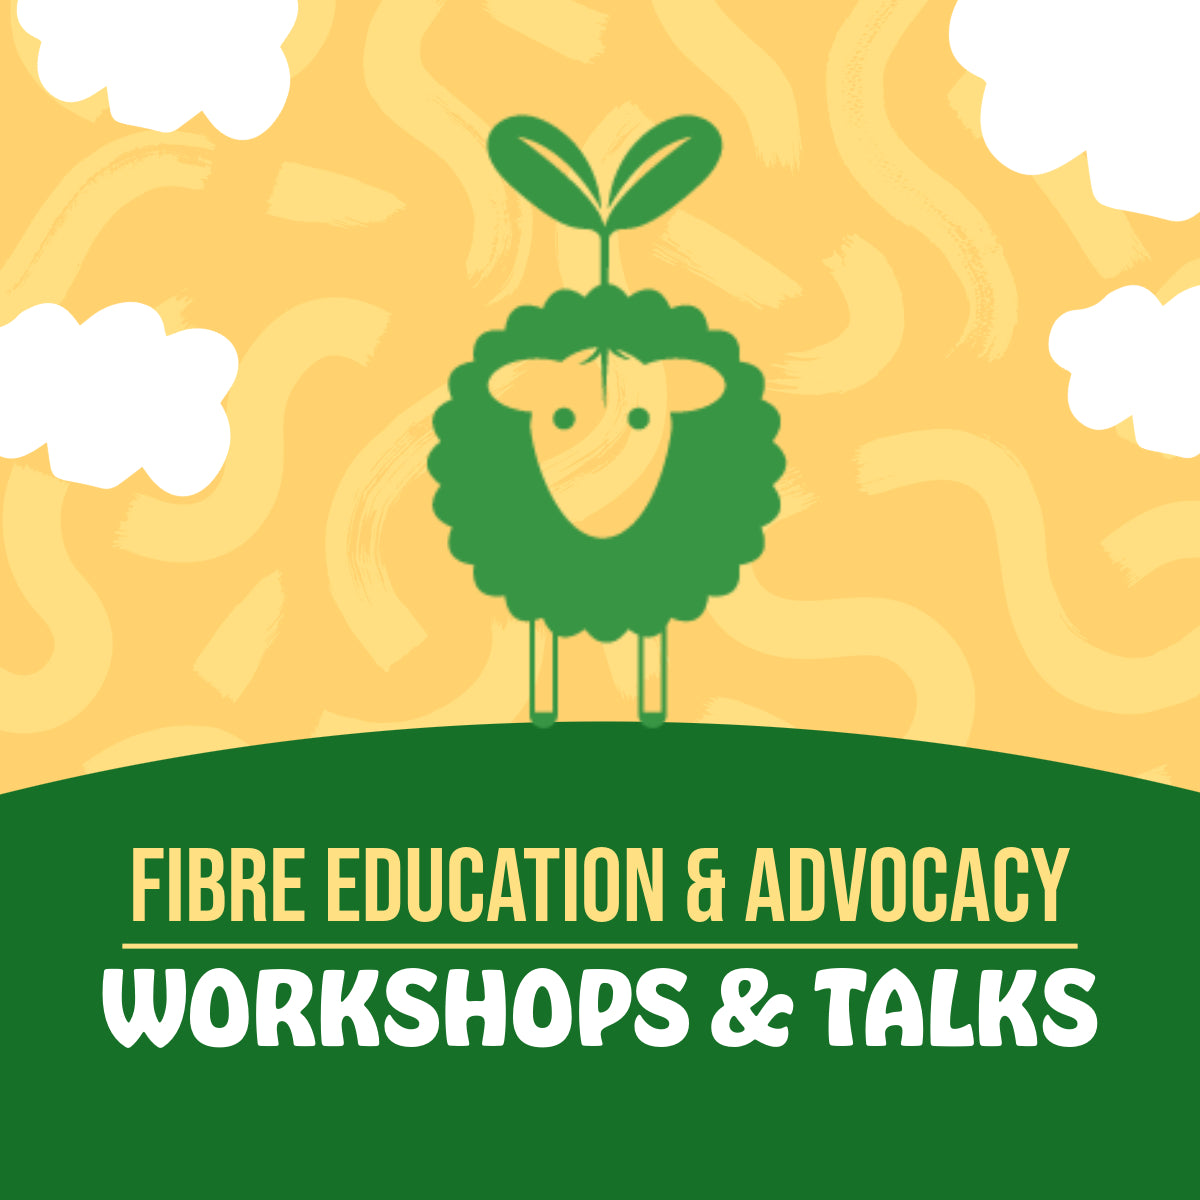 Speaking, Workshops, and Education